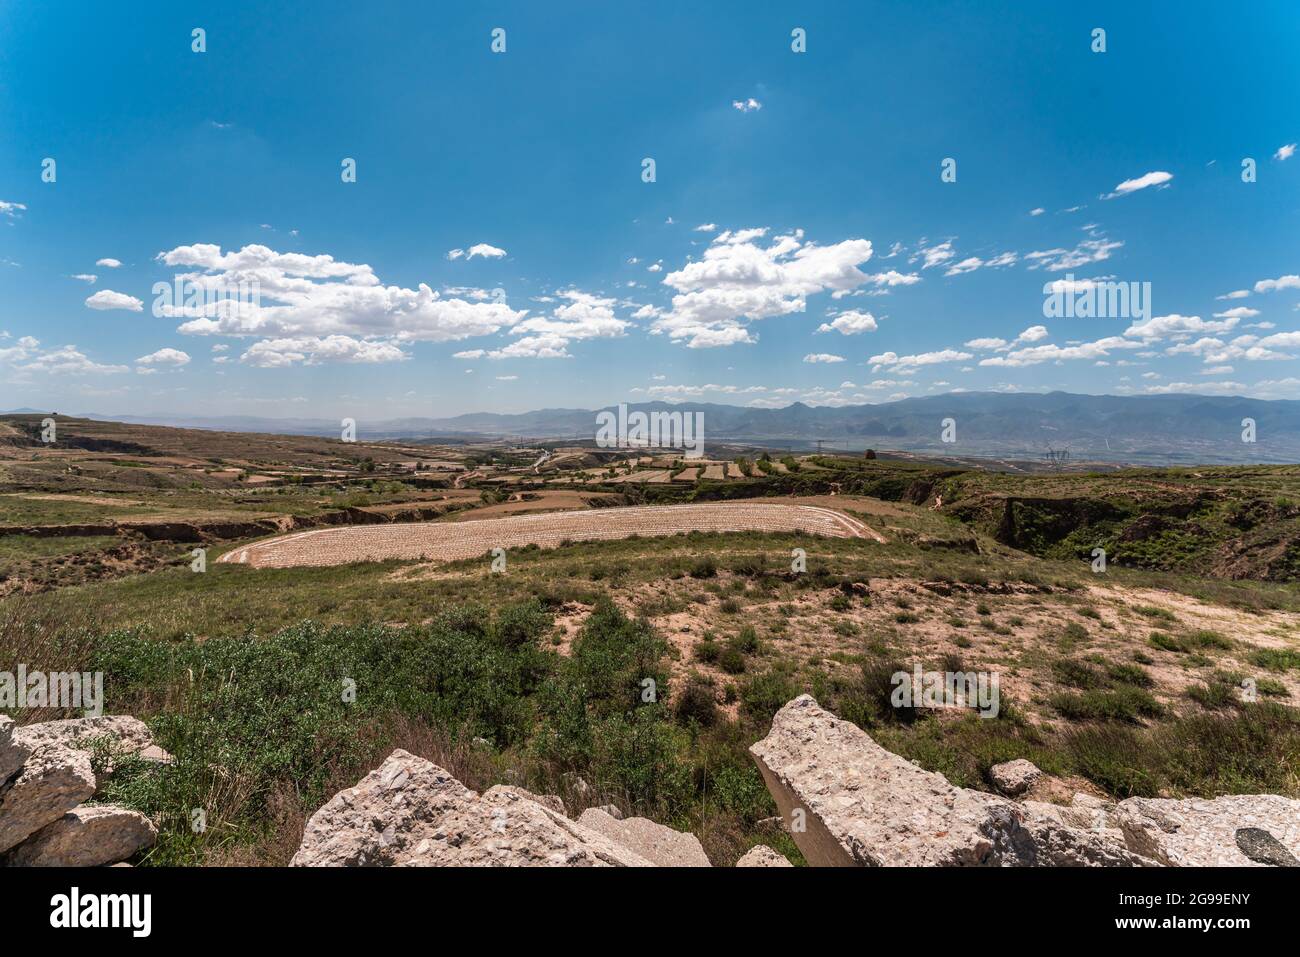 Rural Natural Landscape of Loess Plateau in Shanxi Province, China Stock Photo